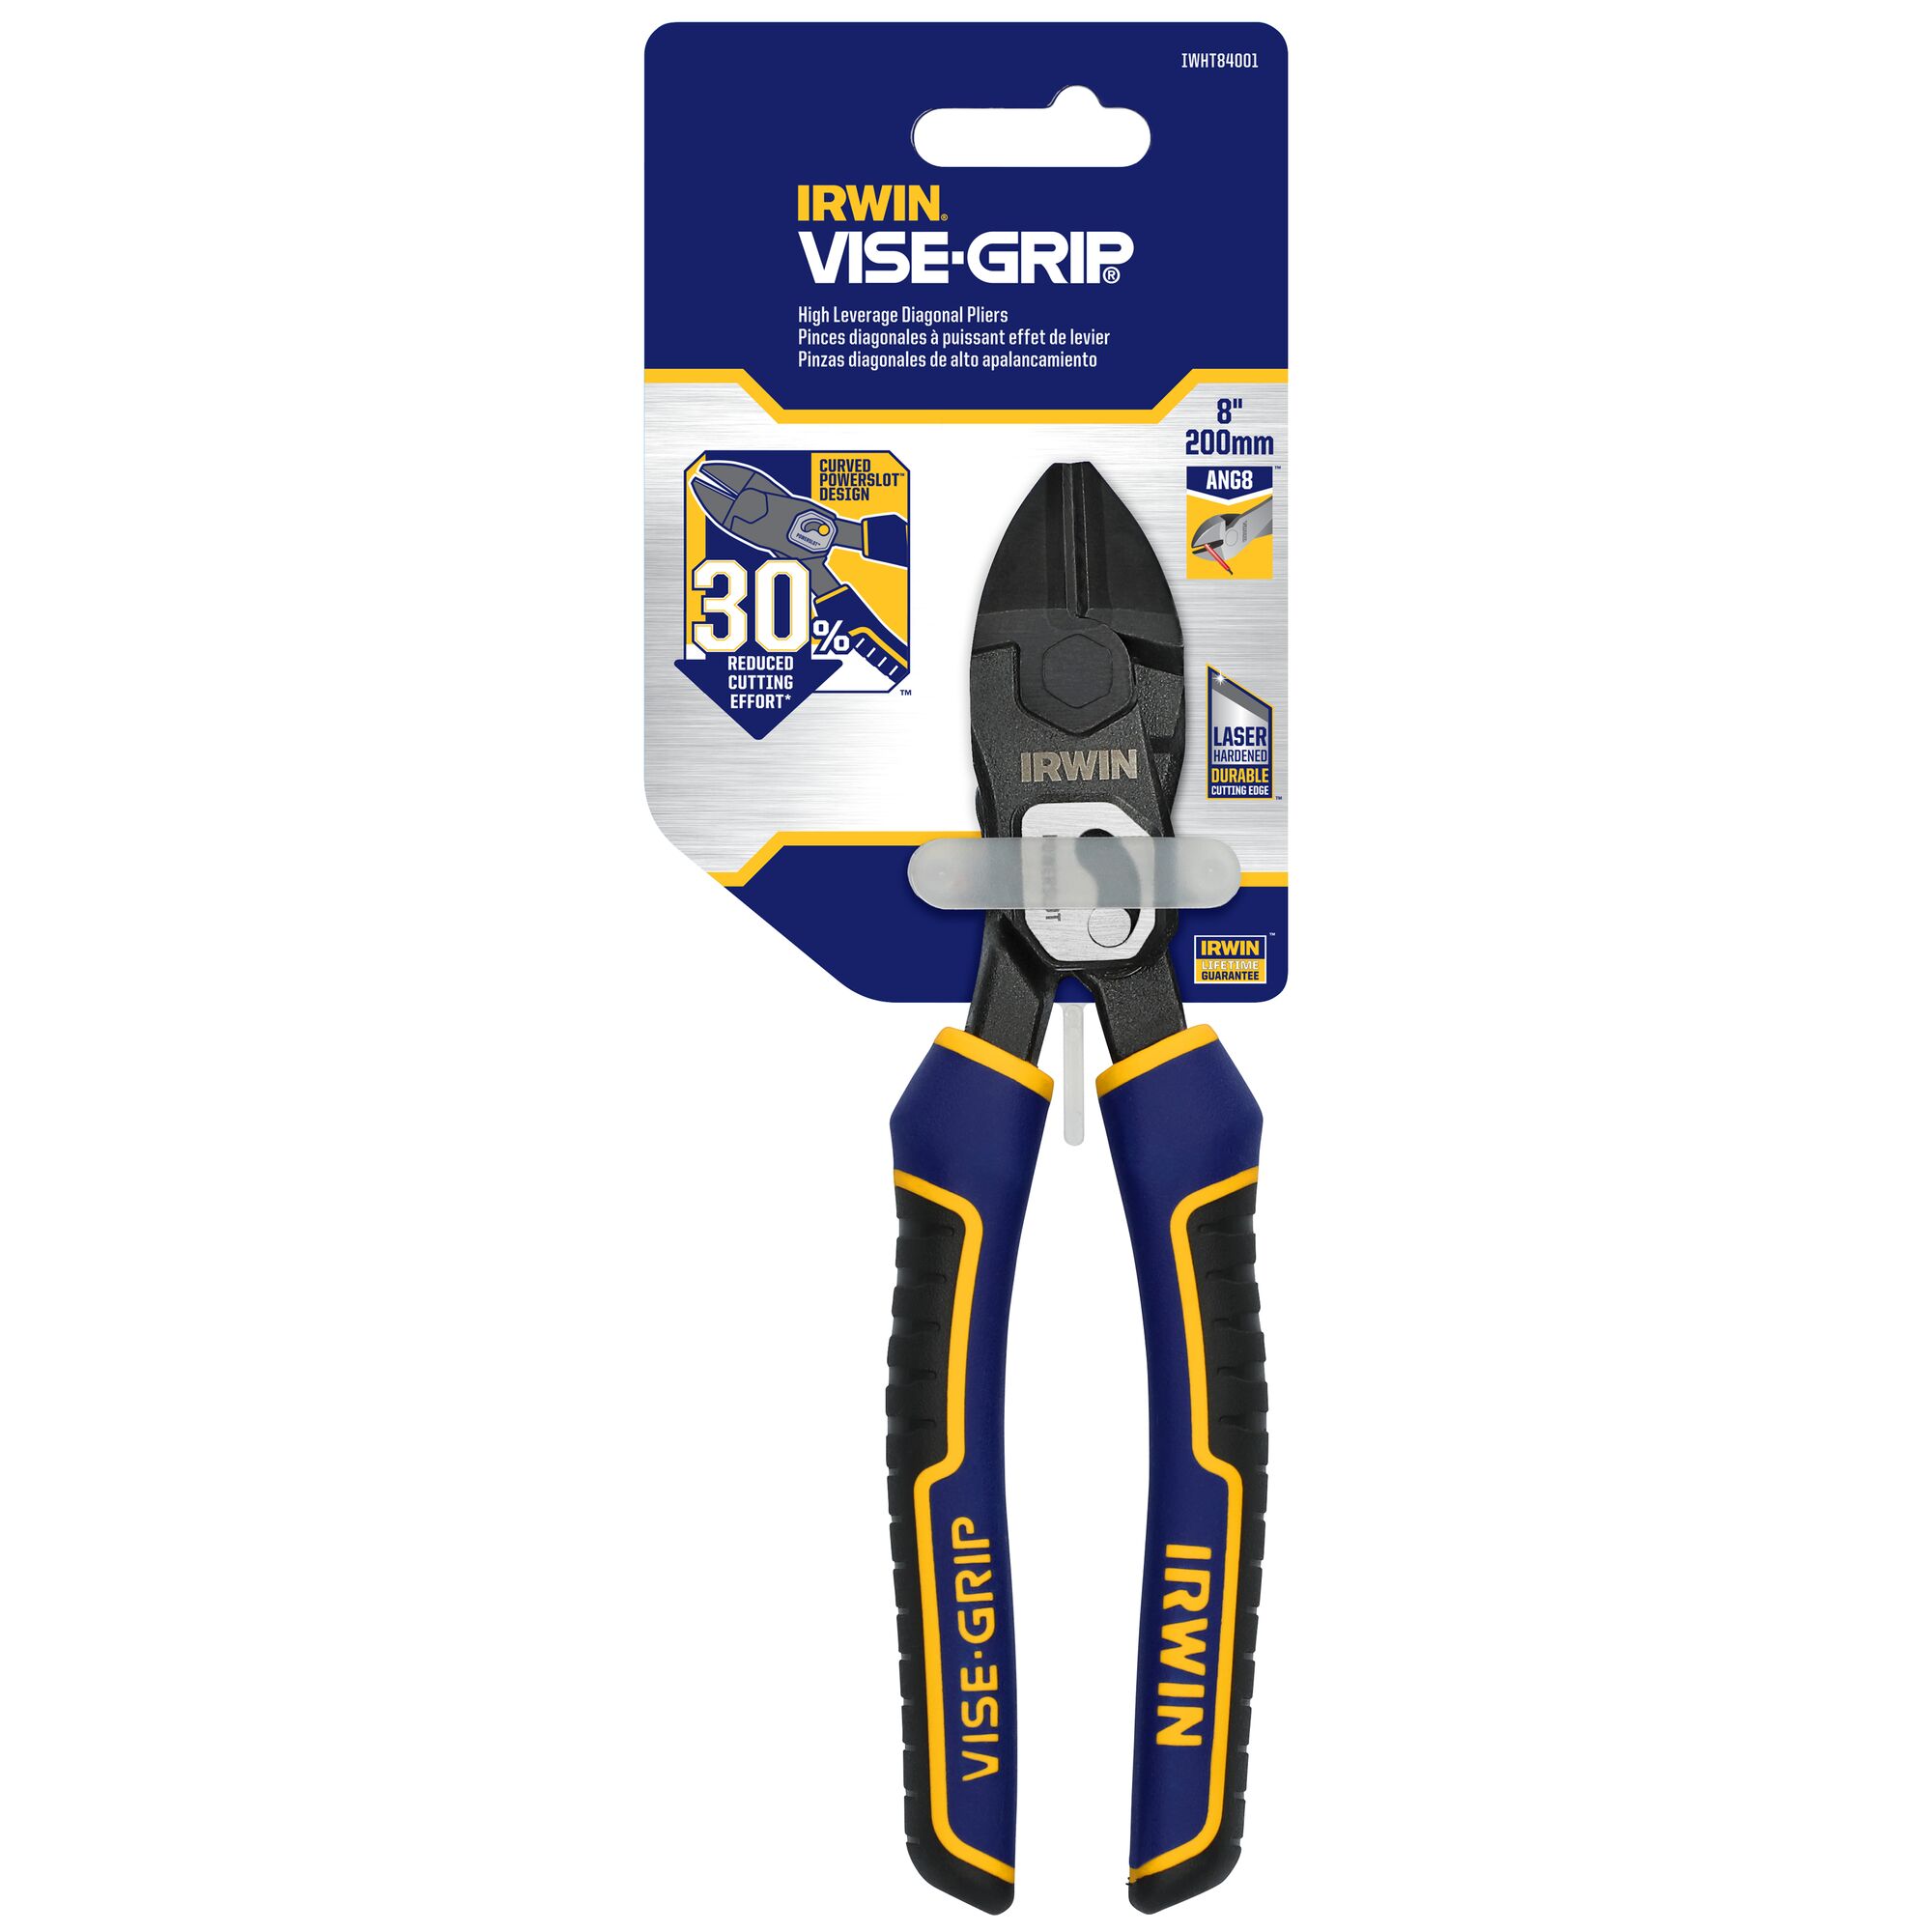 IRWIN VISE-GRIP 8-in Electrical Pliers with Wire Cutter in the